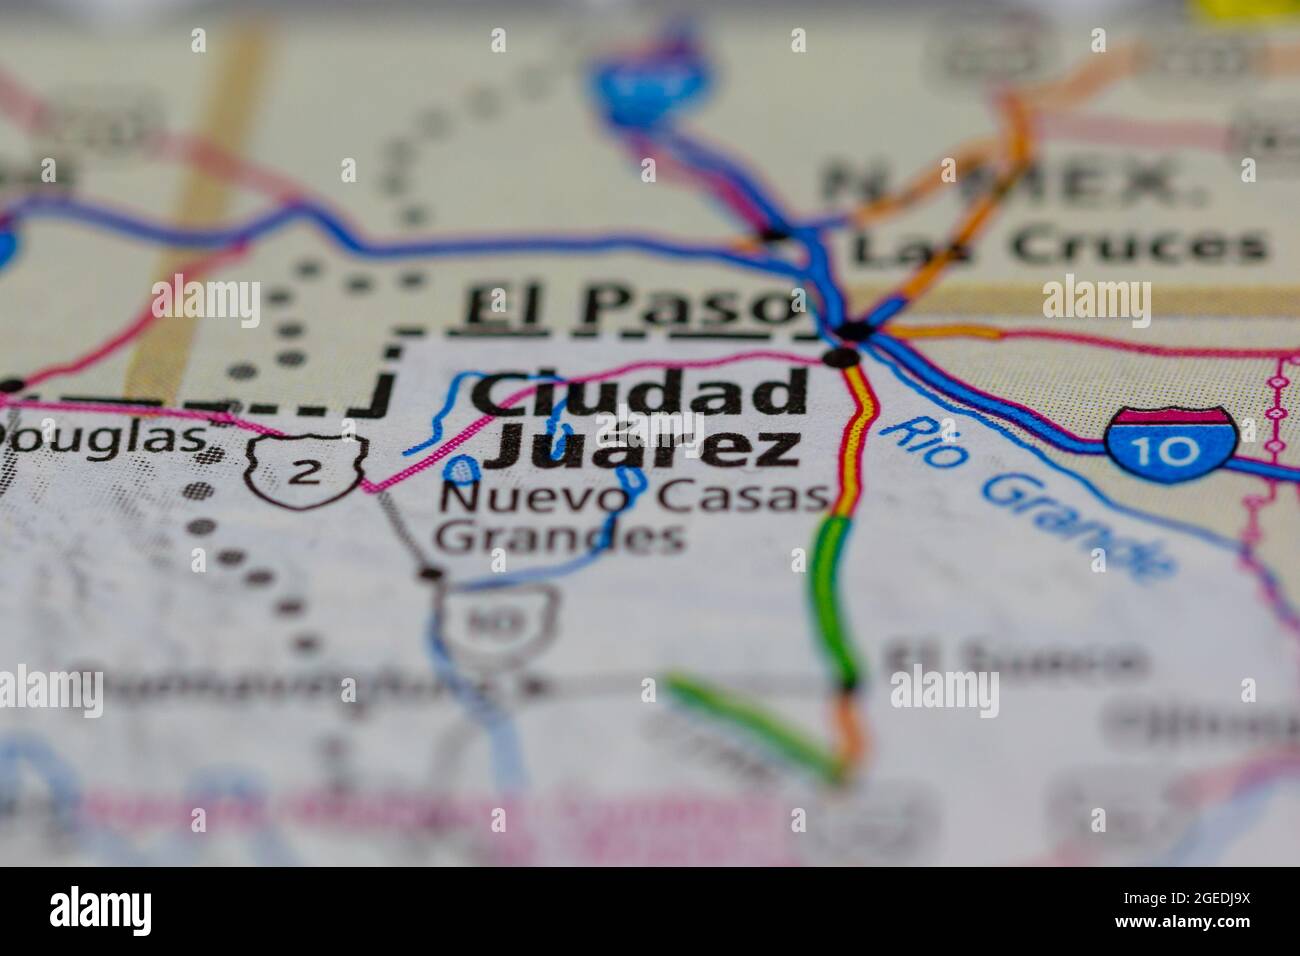 Ciudad Juarez Mexico shown on a road map or Geography map Stock Photo